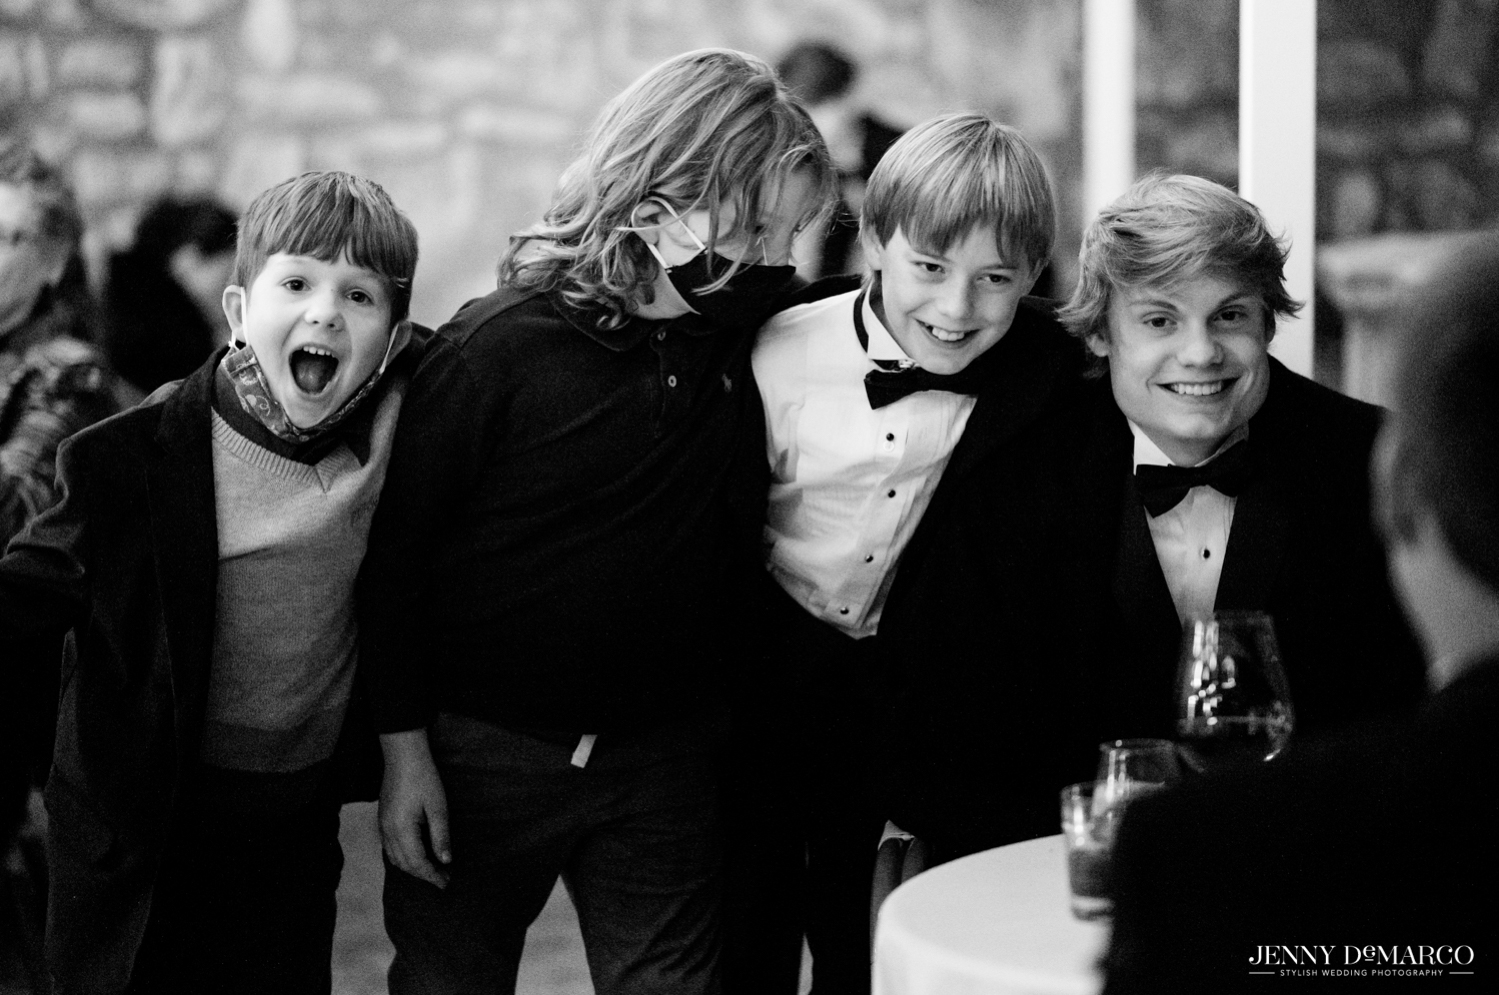 boys of the wedding laughing together